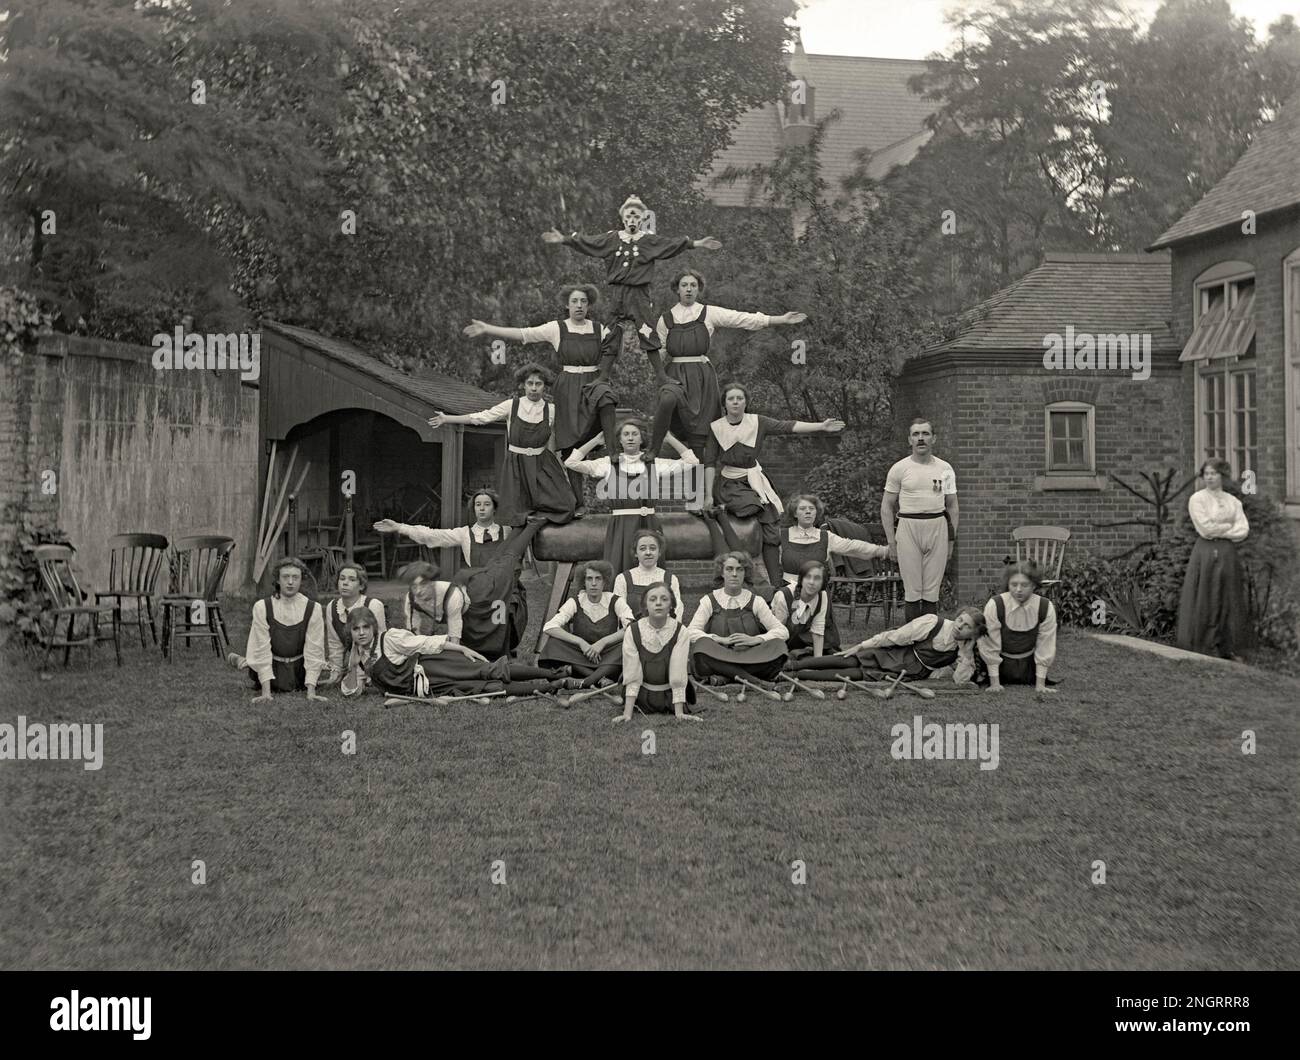 A gymnastic display outdoors with 18 schoolgirls, a young man and a male instructor forming a human pyramid posing on a ‘horse’, UK c.1900. Balance skills plus fitness and flexibility are called upon. Oddly, the young man in the top position wears a clown outfit. The male teacher is standing on the right. The other girls are dressed in long skirts and knickerbockers. In front of the girls are gymnastic clubs. The long exposure means there is some motion blur – a vintage 1800s/1900s, Victorian/Edwardian photograph. Stock Photo